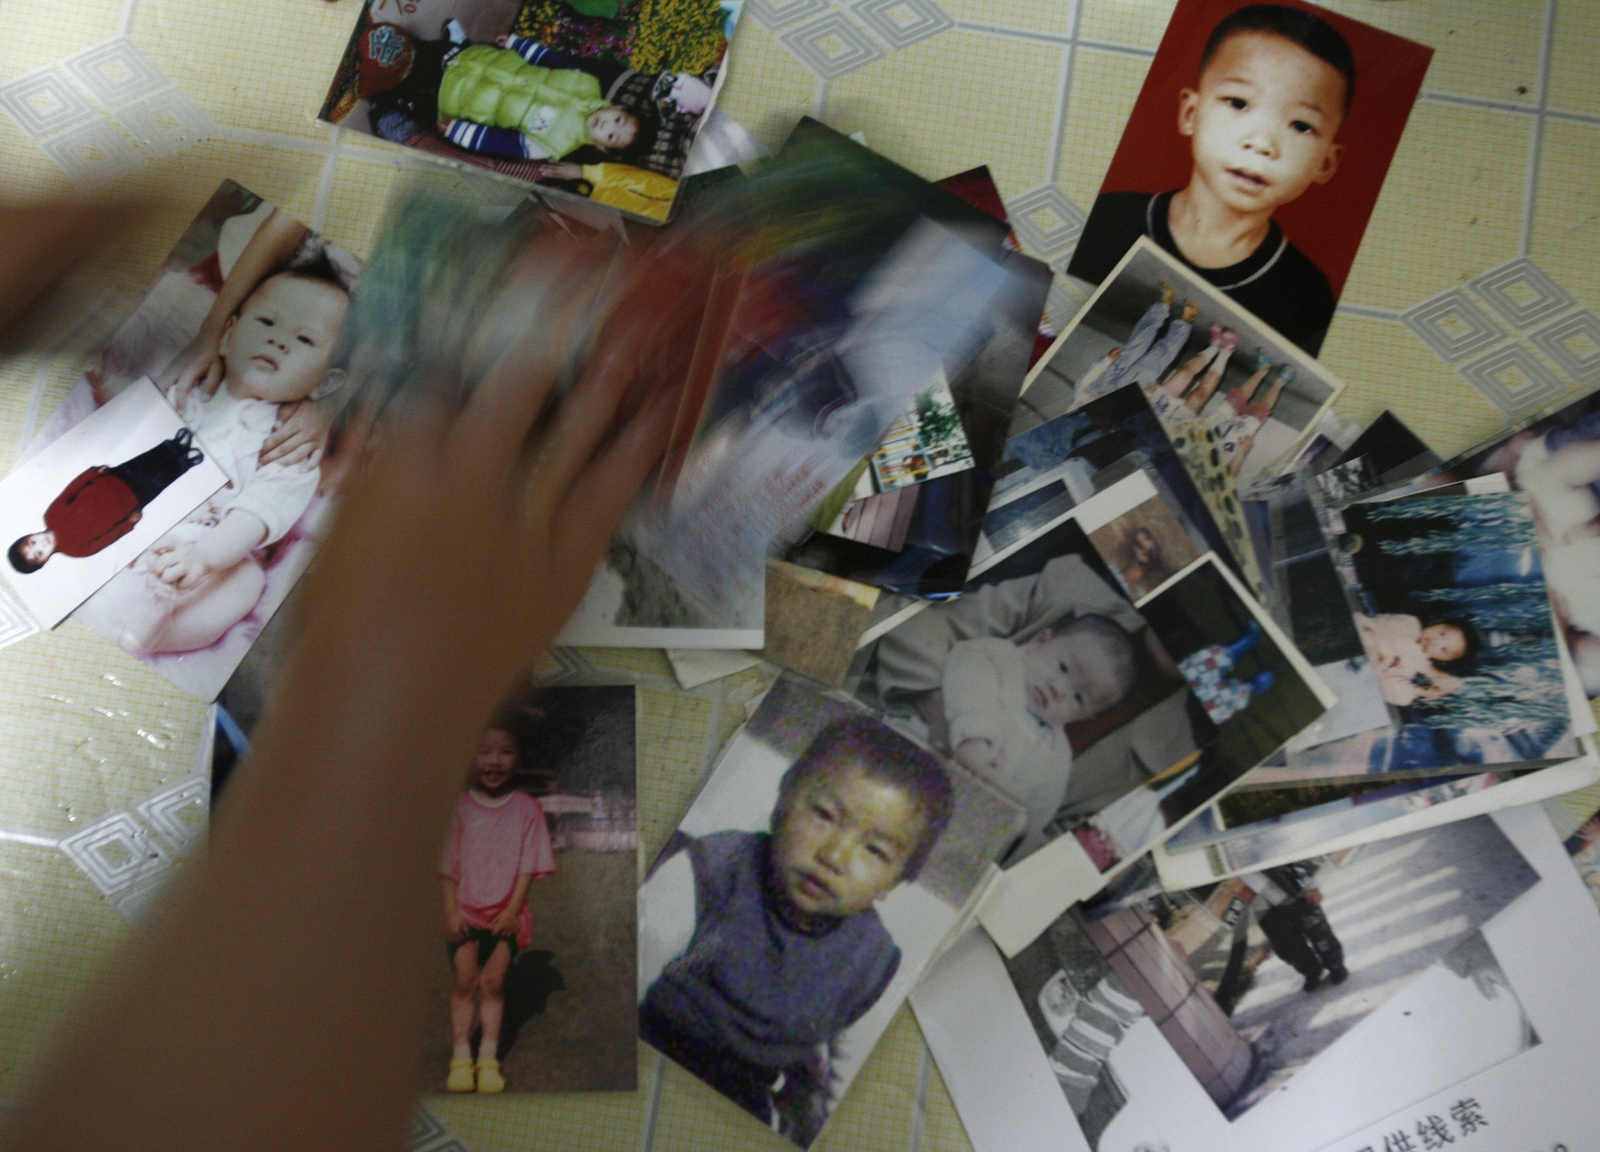 Baby Come Home: Top Chinese brands using 404 error pages to highlight missing children1600 x 1152